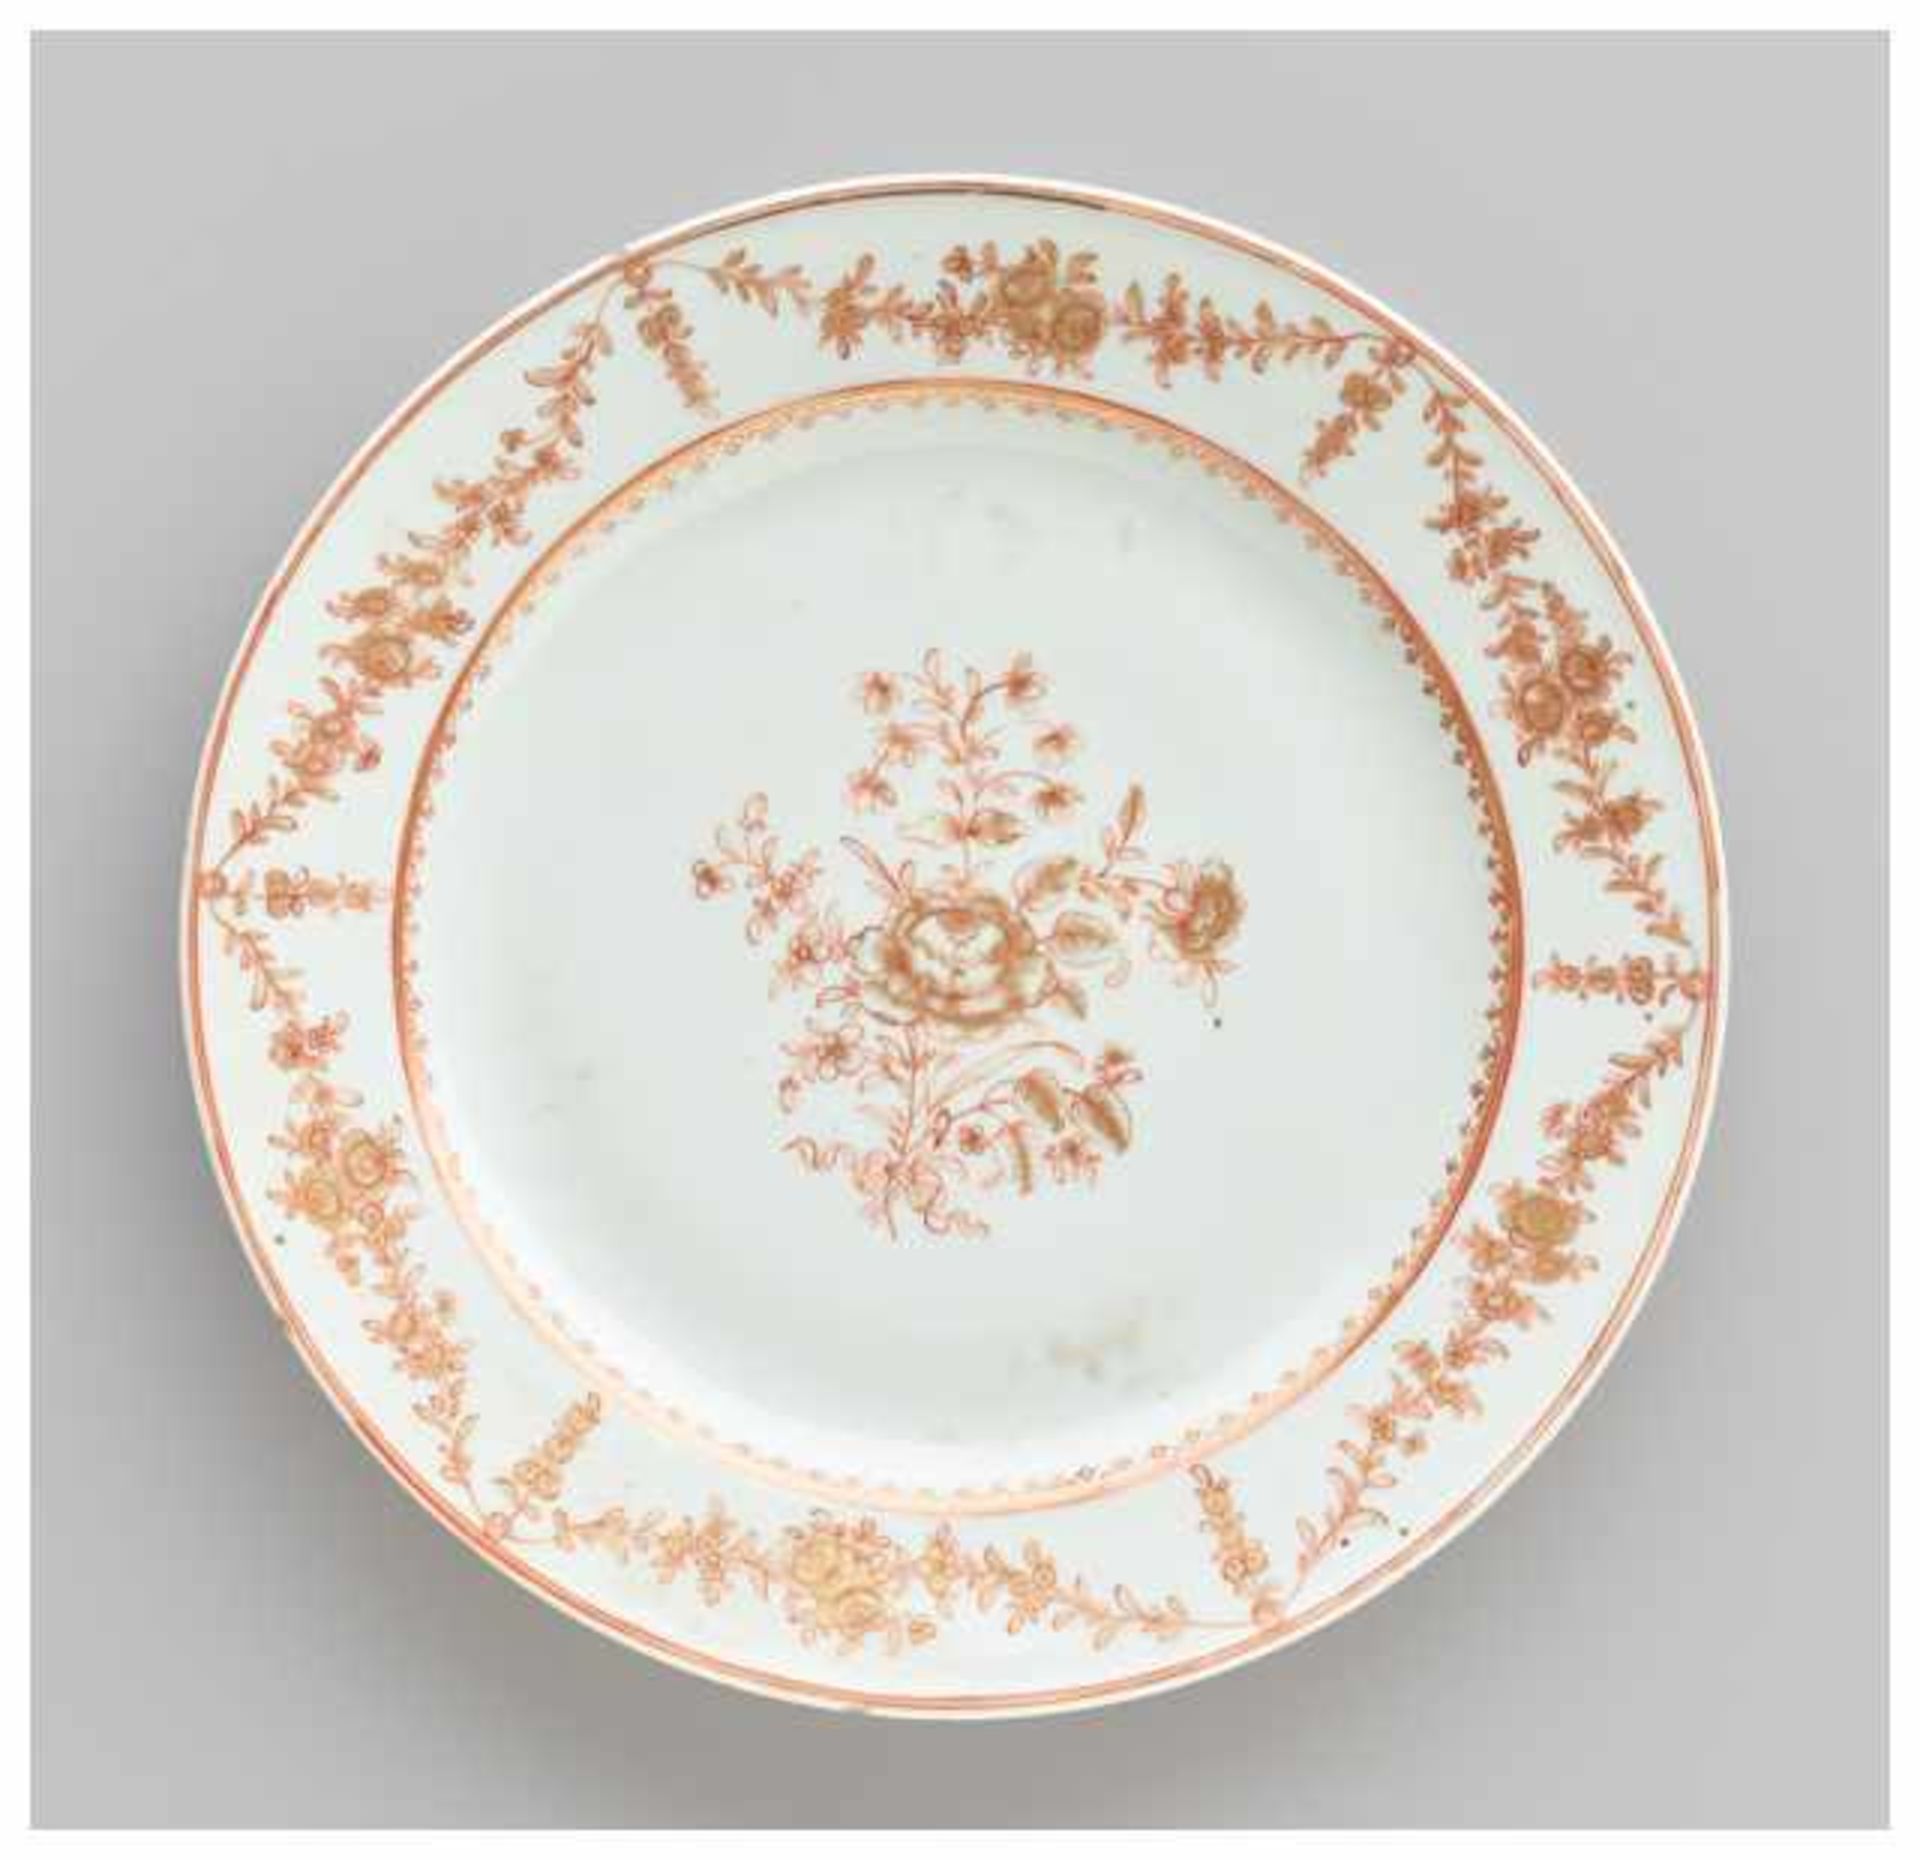 A 'PEONY' EXPORT PORCELAIN PLATE The front painted in gold and iron red on a transparent glaze,